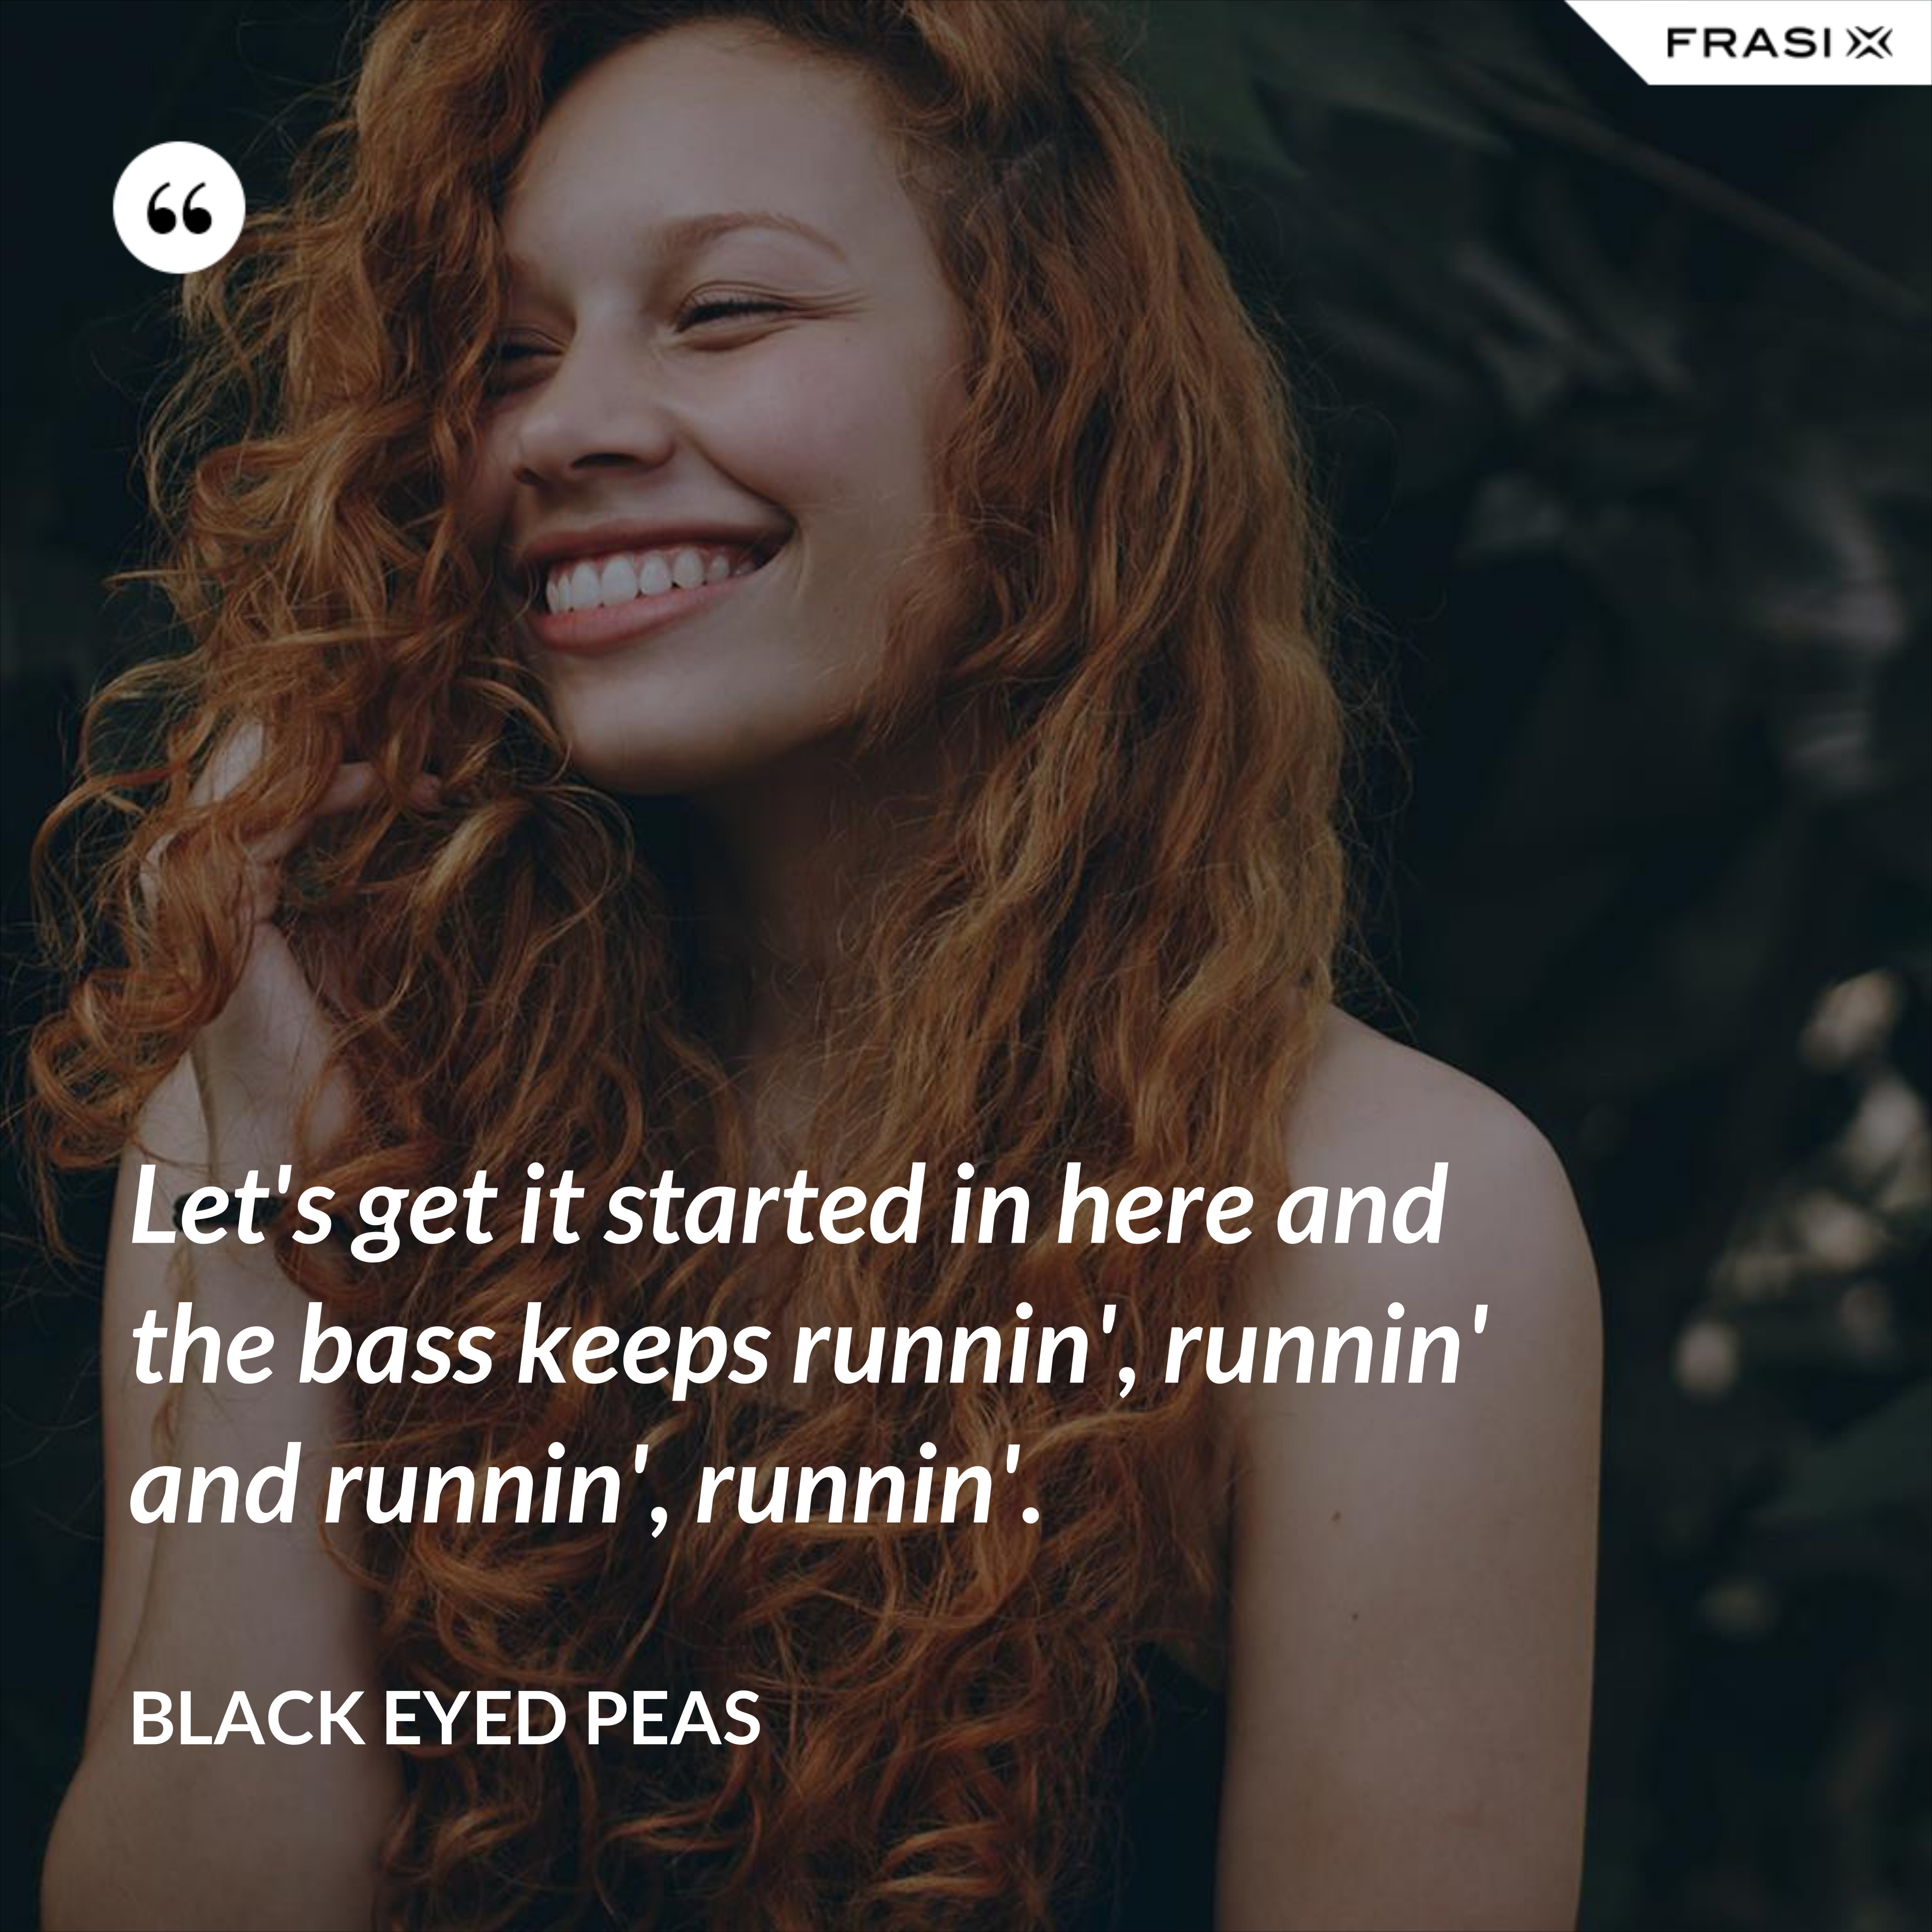 Let's get it started in here and the bass keeps runnin', runnin' and runnin', runnin'. - Black Eyed Peas